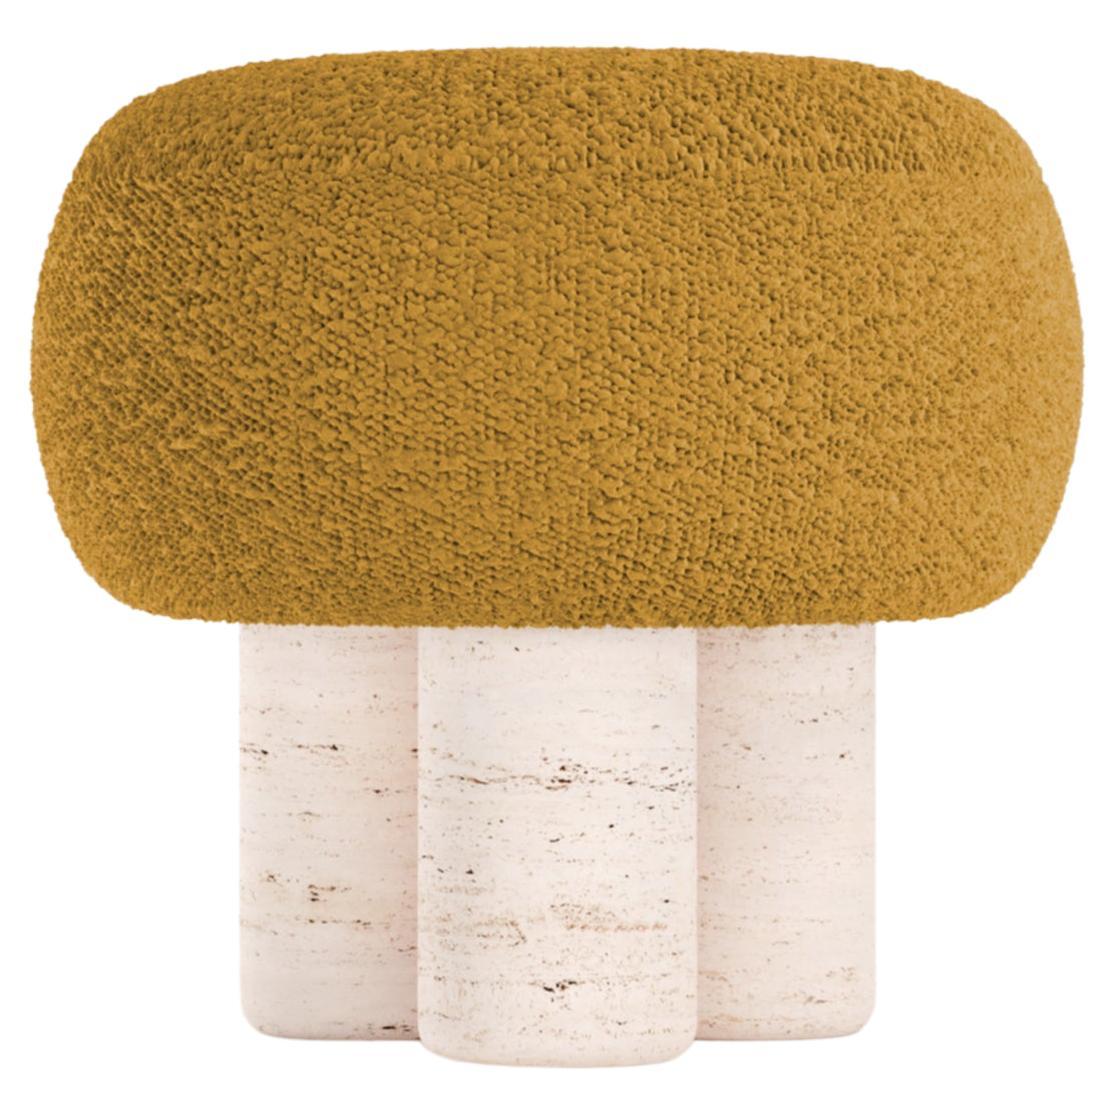 21st Century Designed by Saccal Design House Hygge Stool Boucle Travertino For Sale